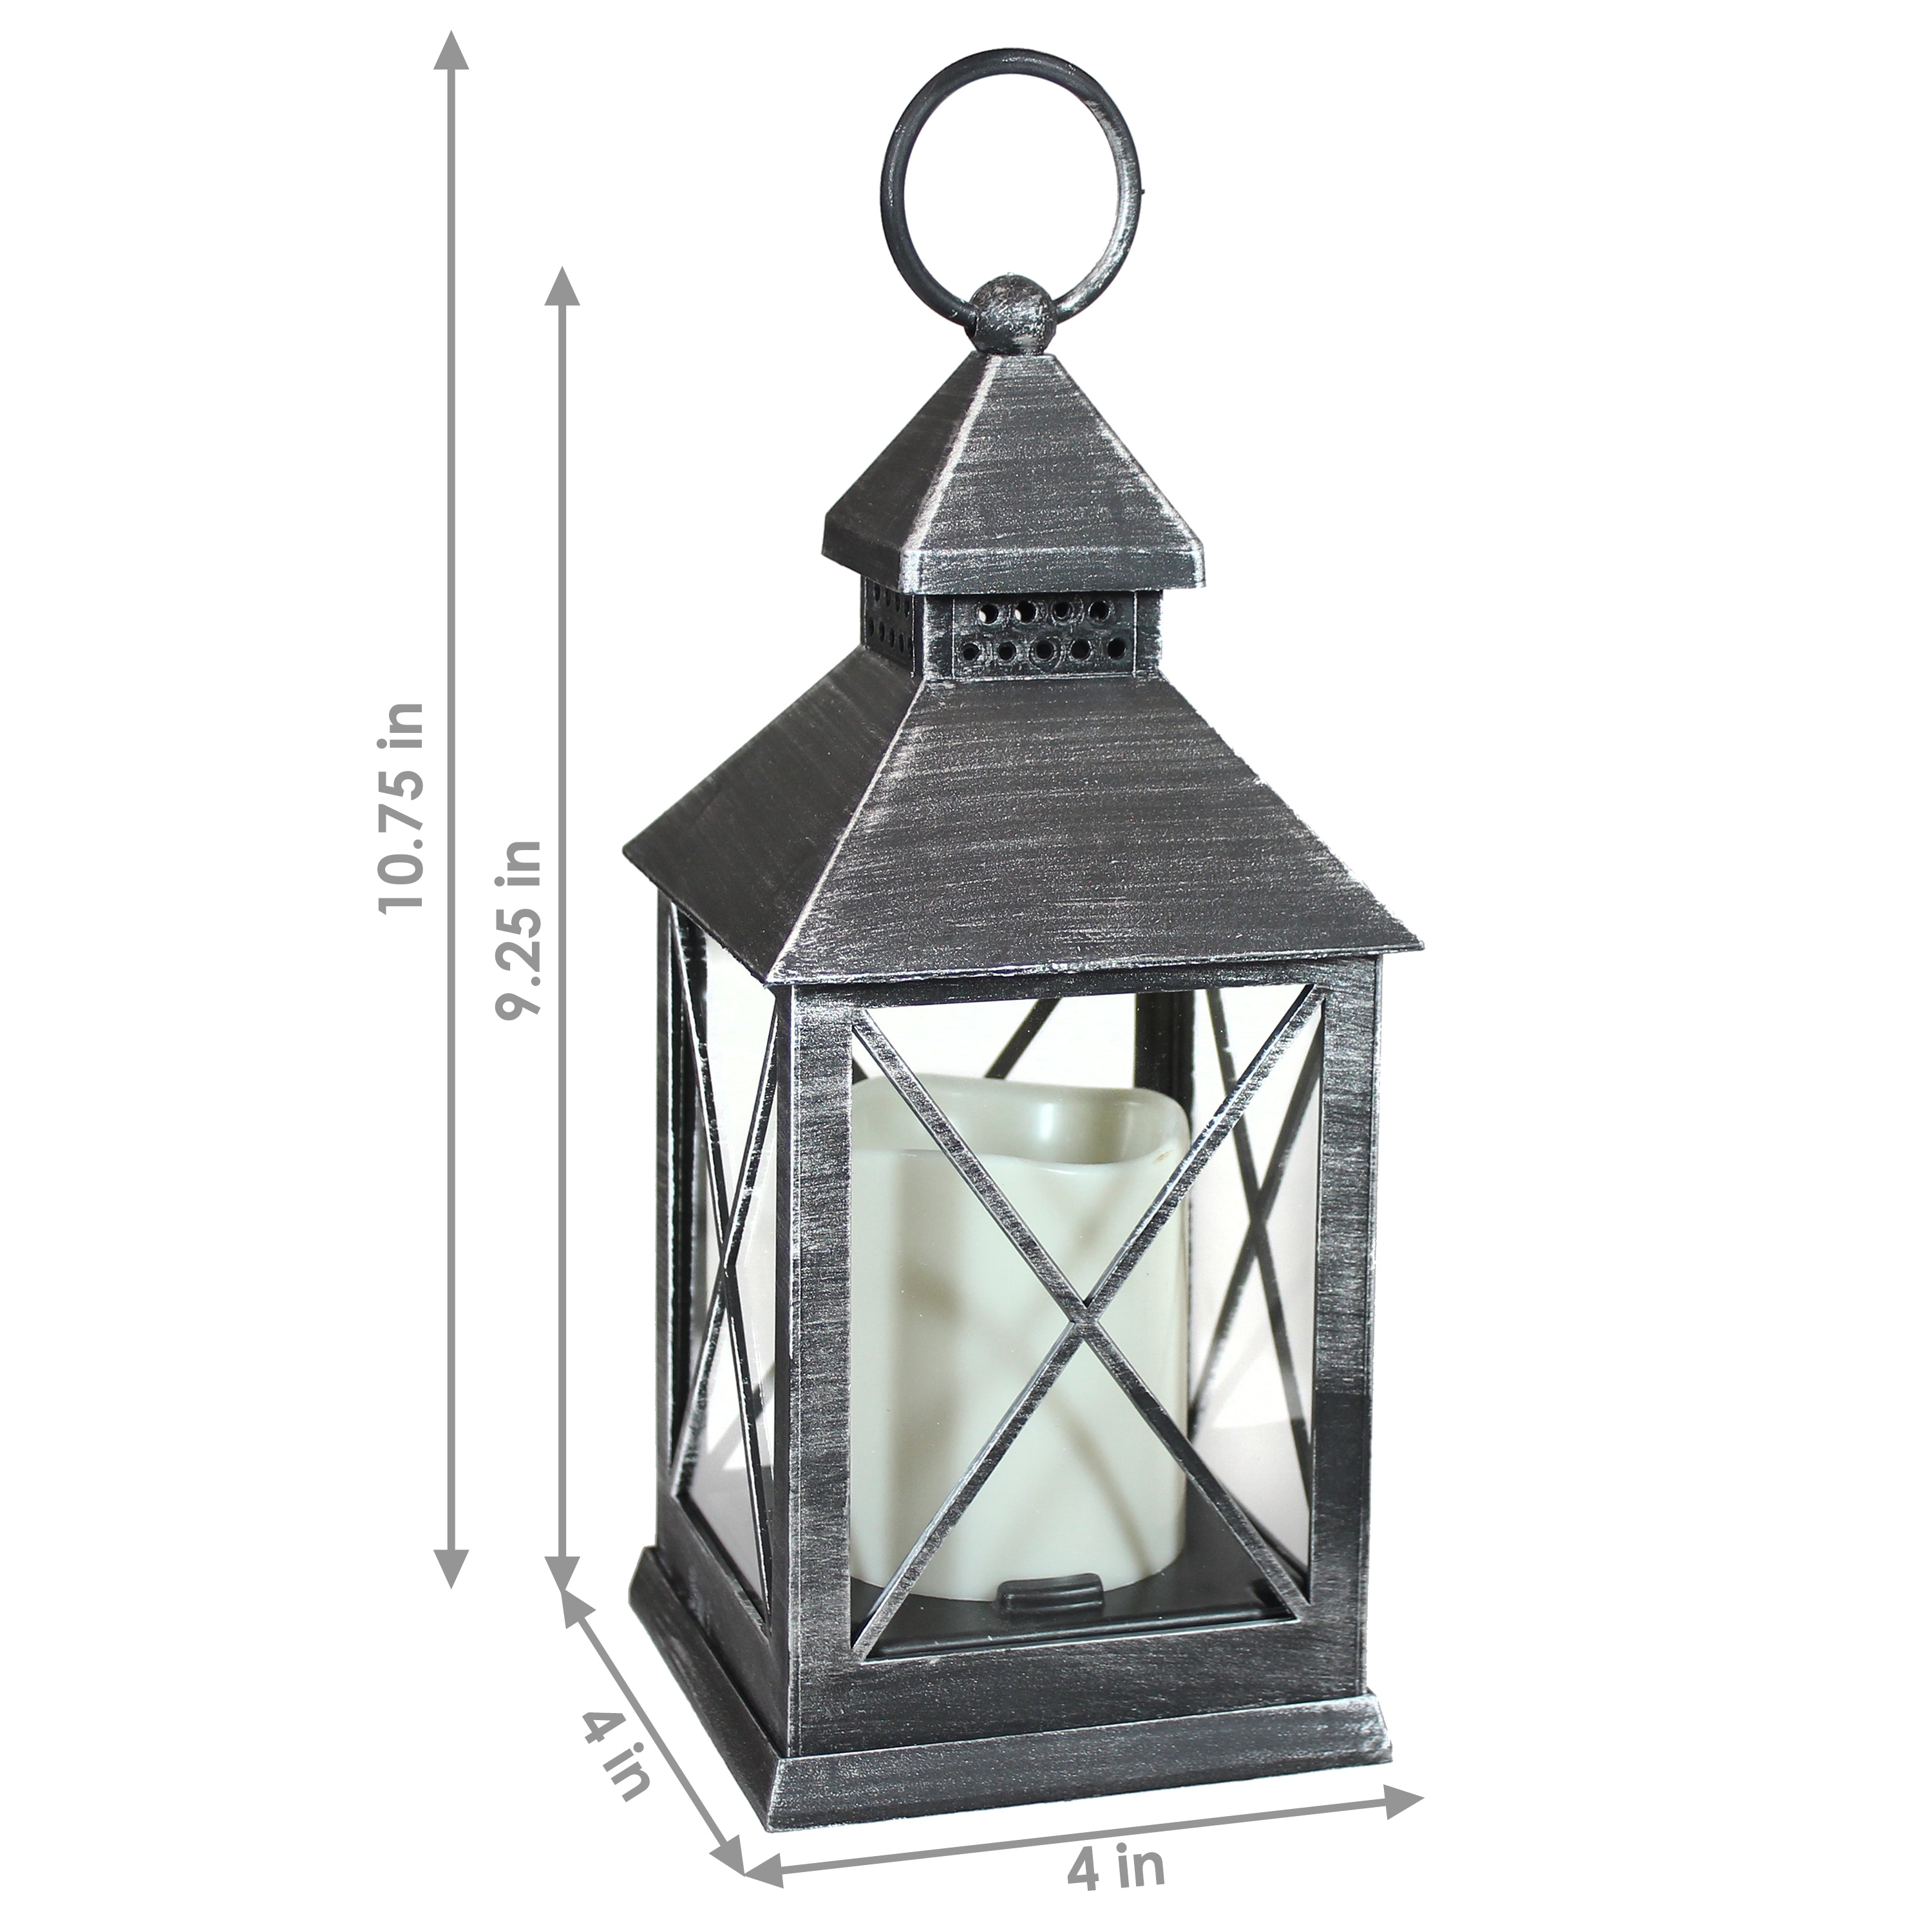 https://ak1.ostkcdn.com/images/products/is/images/direct/24e65a3cd8b002a0d482f5cffe43a7954ee88384/Sunnydaze-Yorktown-Indoor-Battery-Powered-LED-Candle-Lantern---10-Inch.jpg